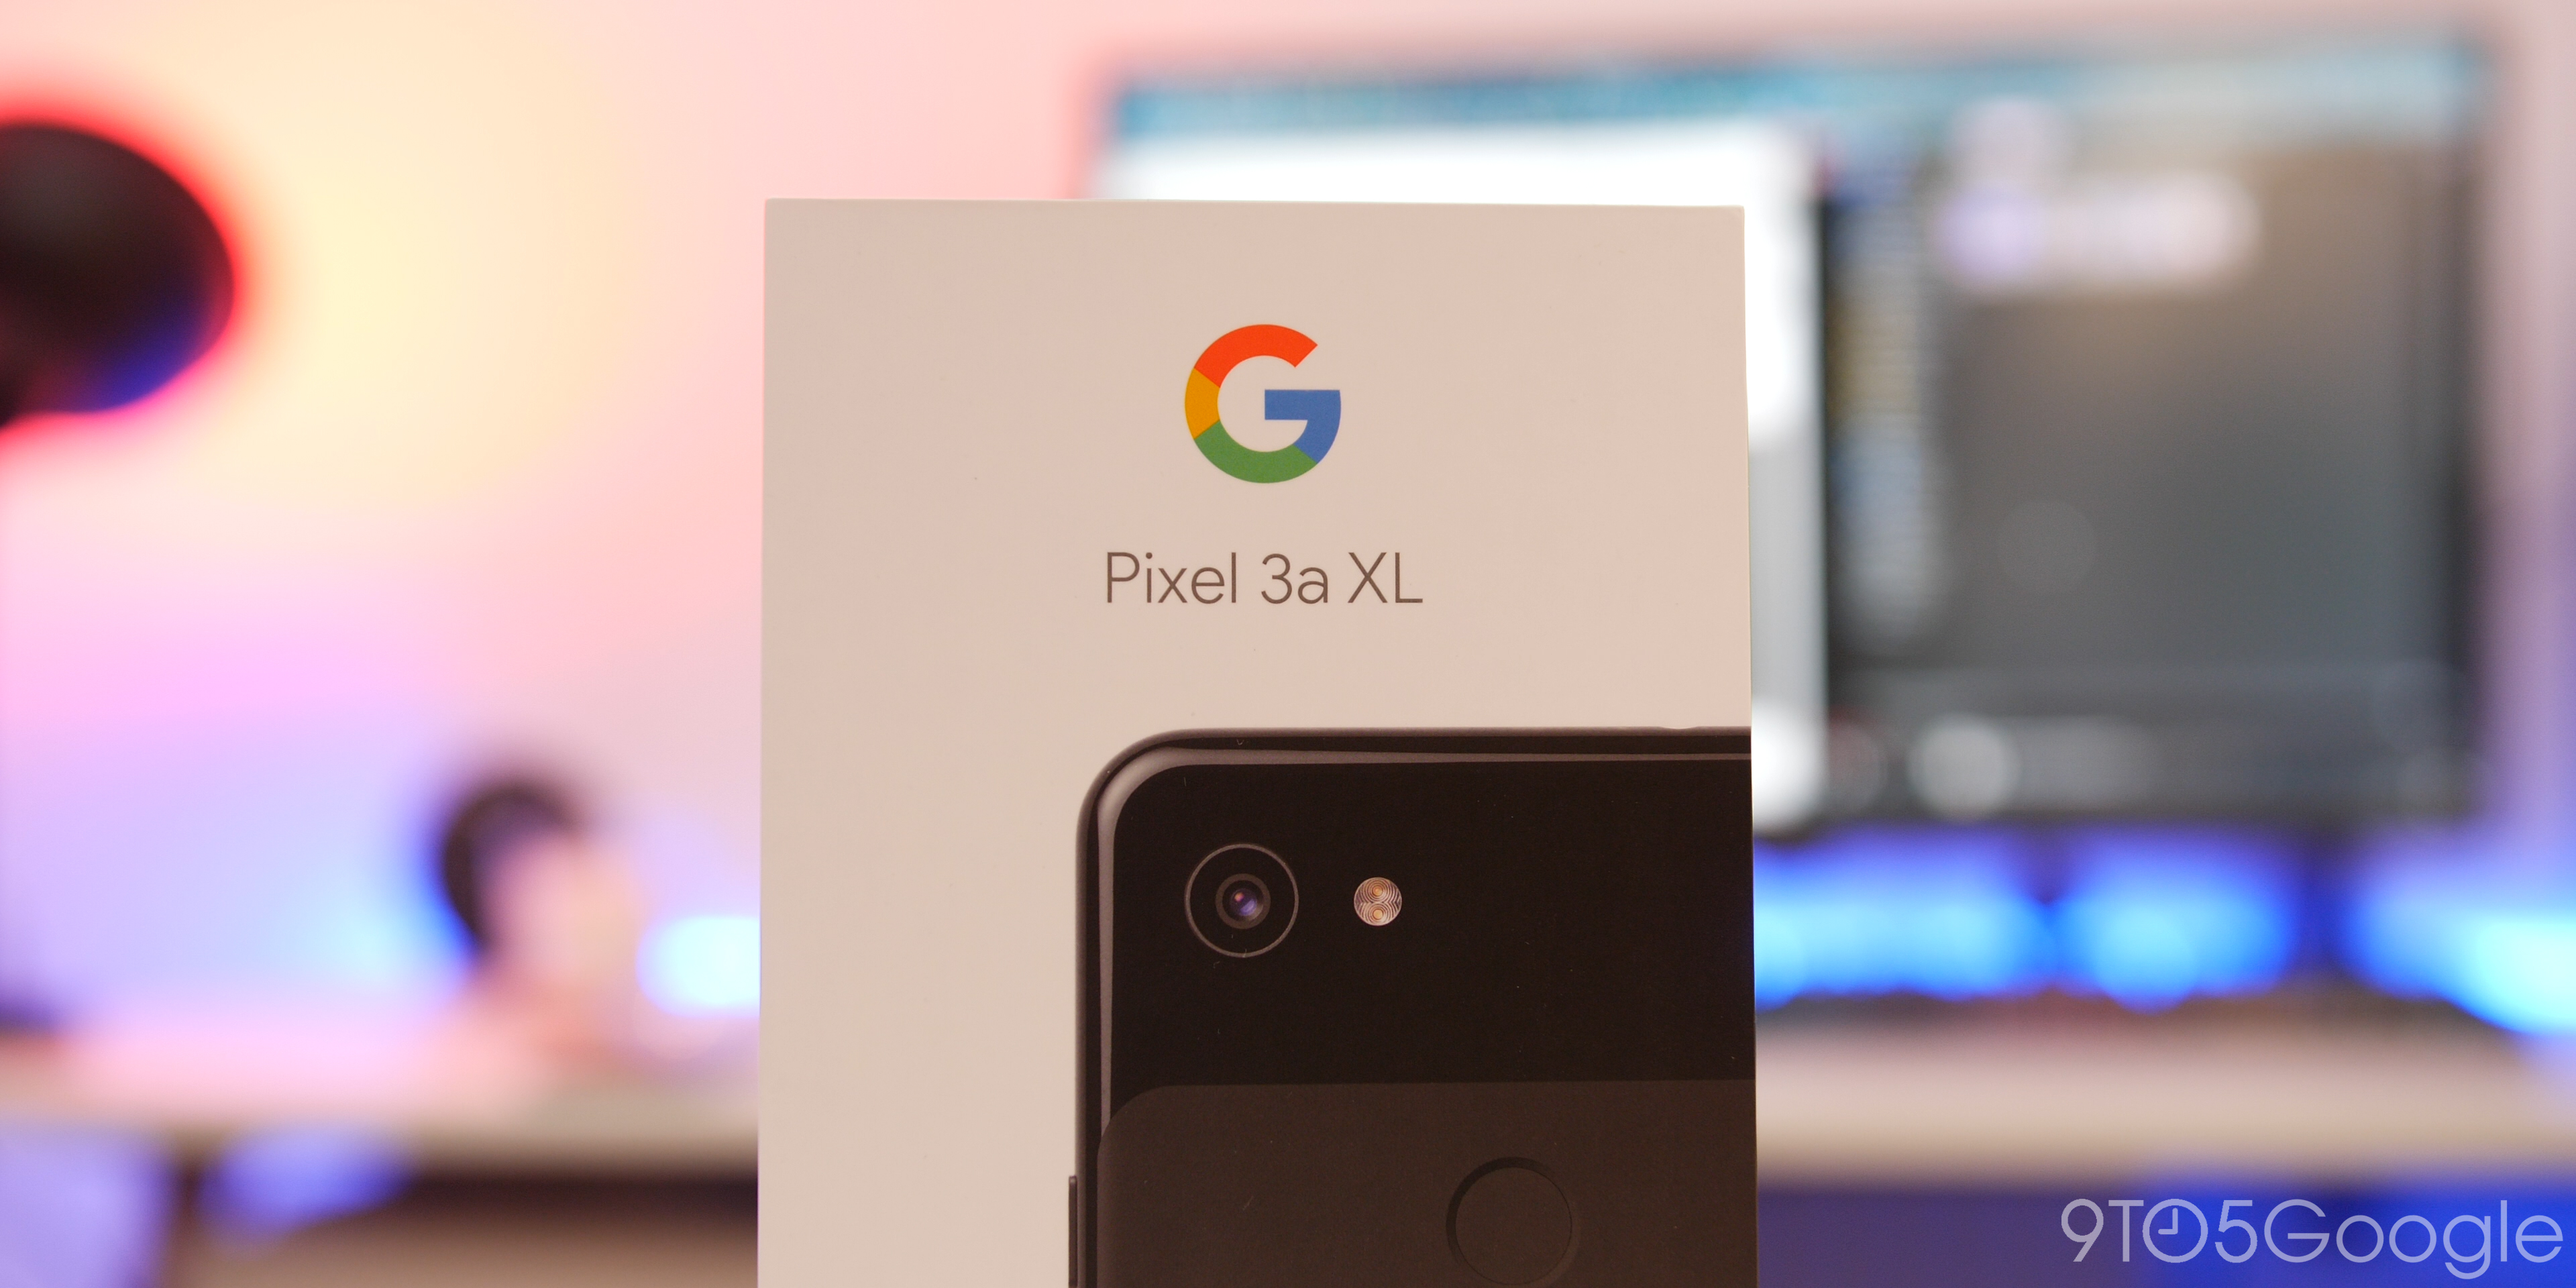 This week’s top stories Pixel 3a launch, Google Fi financing mishap, Android Q Beta 3, and more